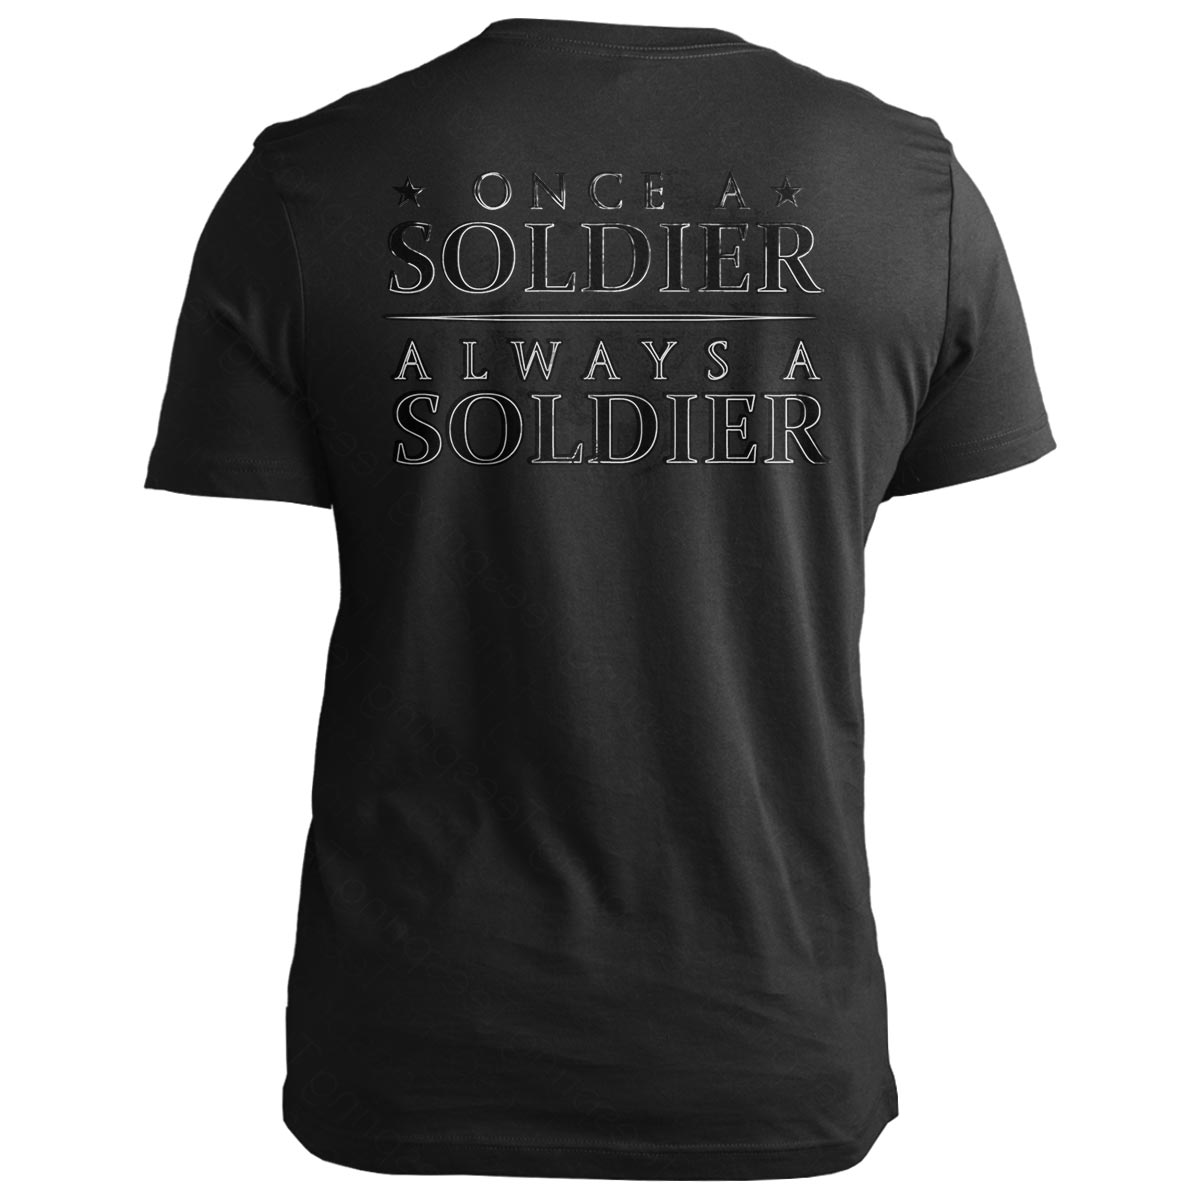 Once a Soldier, Always a Soldier